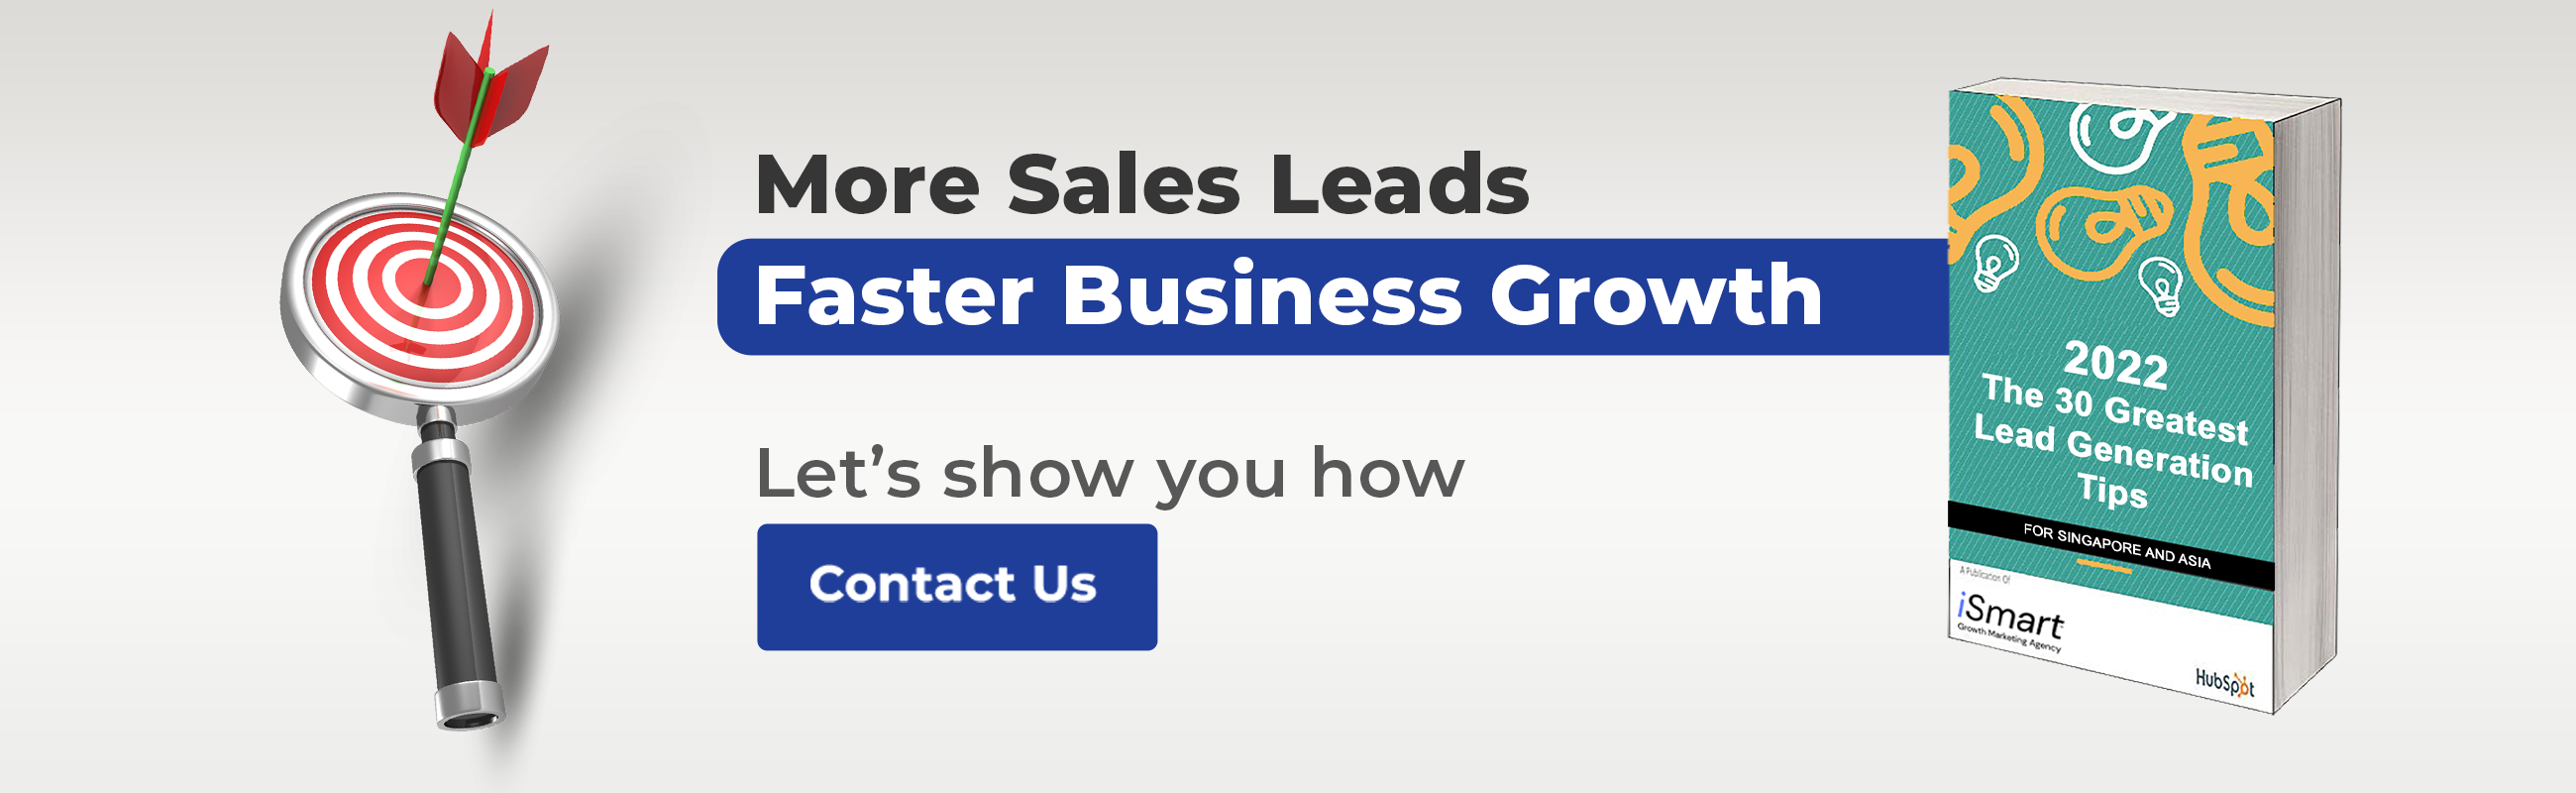 Lead Generation in Singapore and Asia